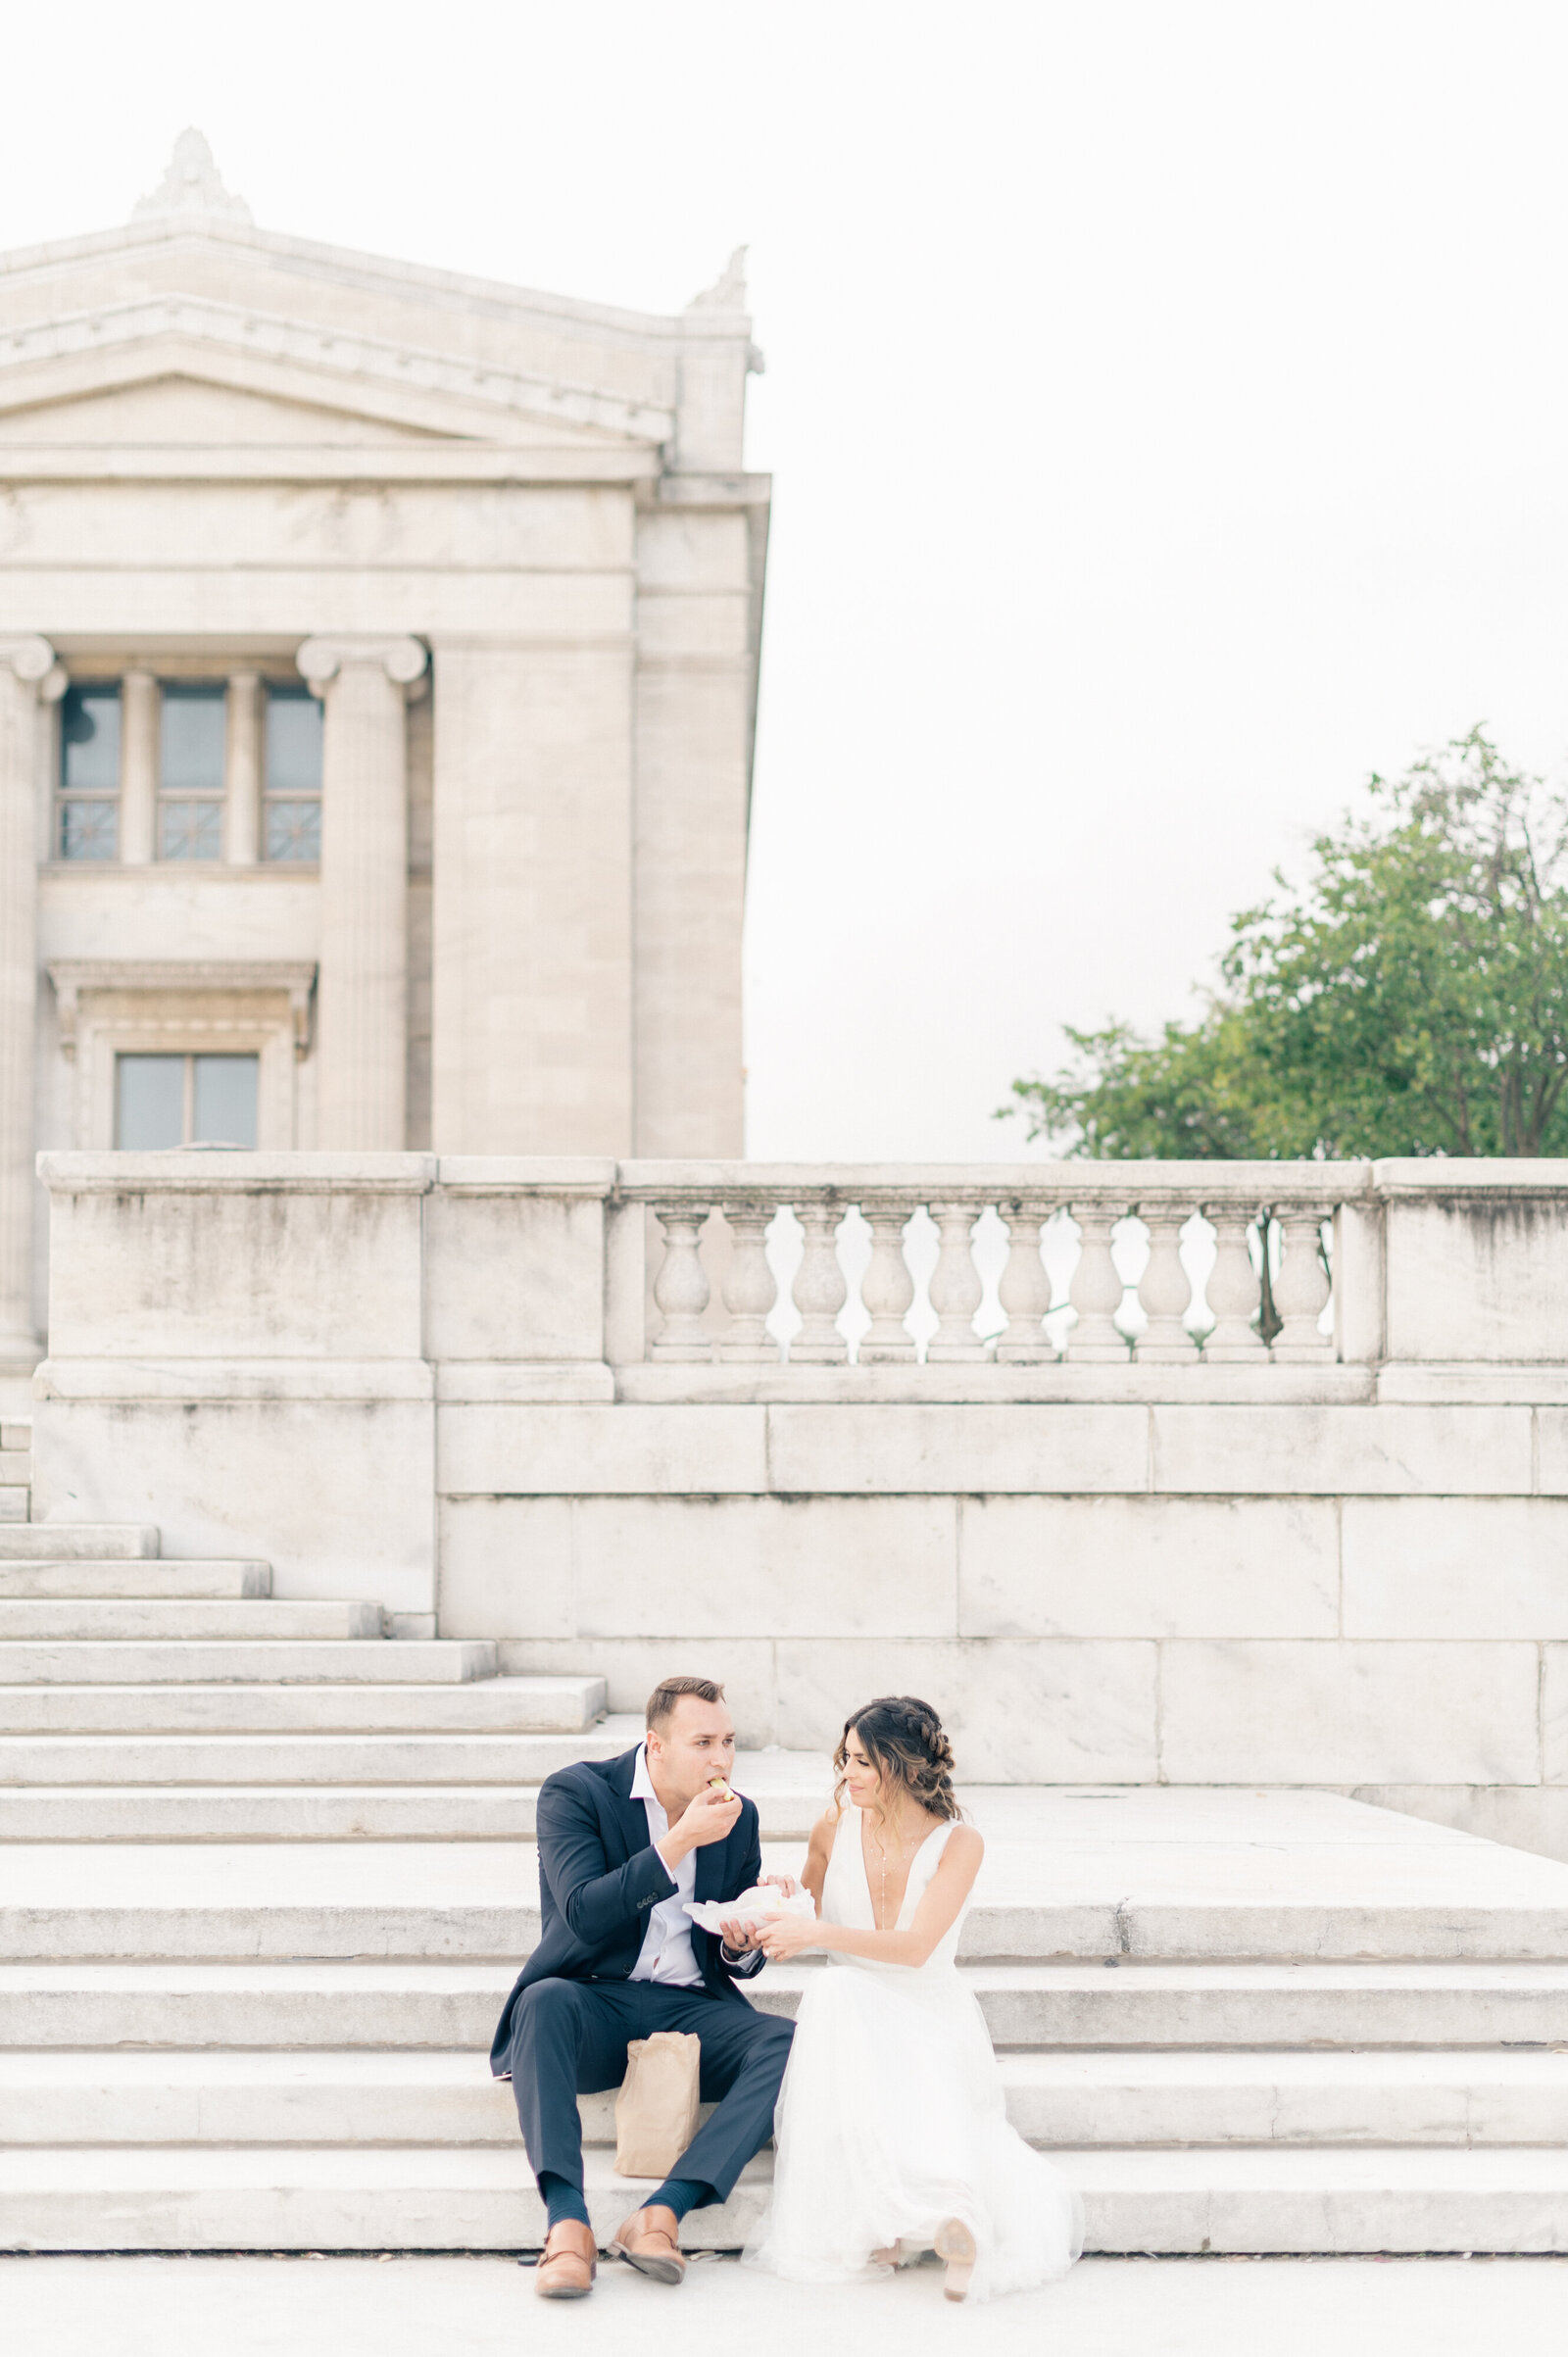 chicago rookery building and board of trade and museum campus wedding photos-8300